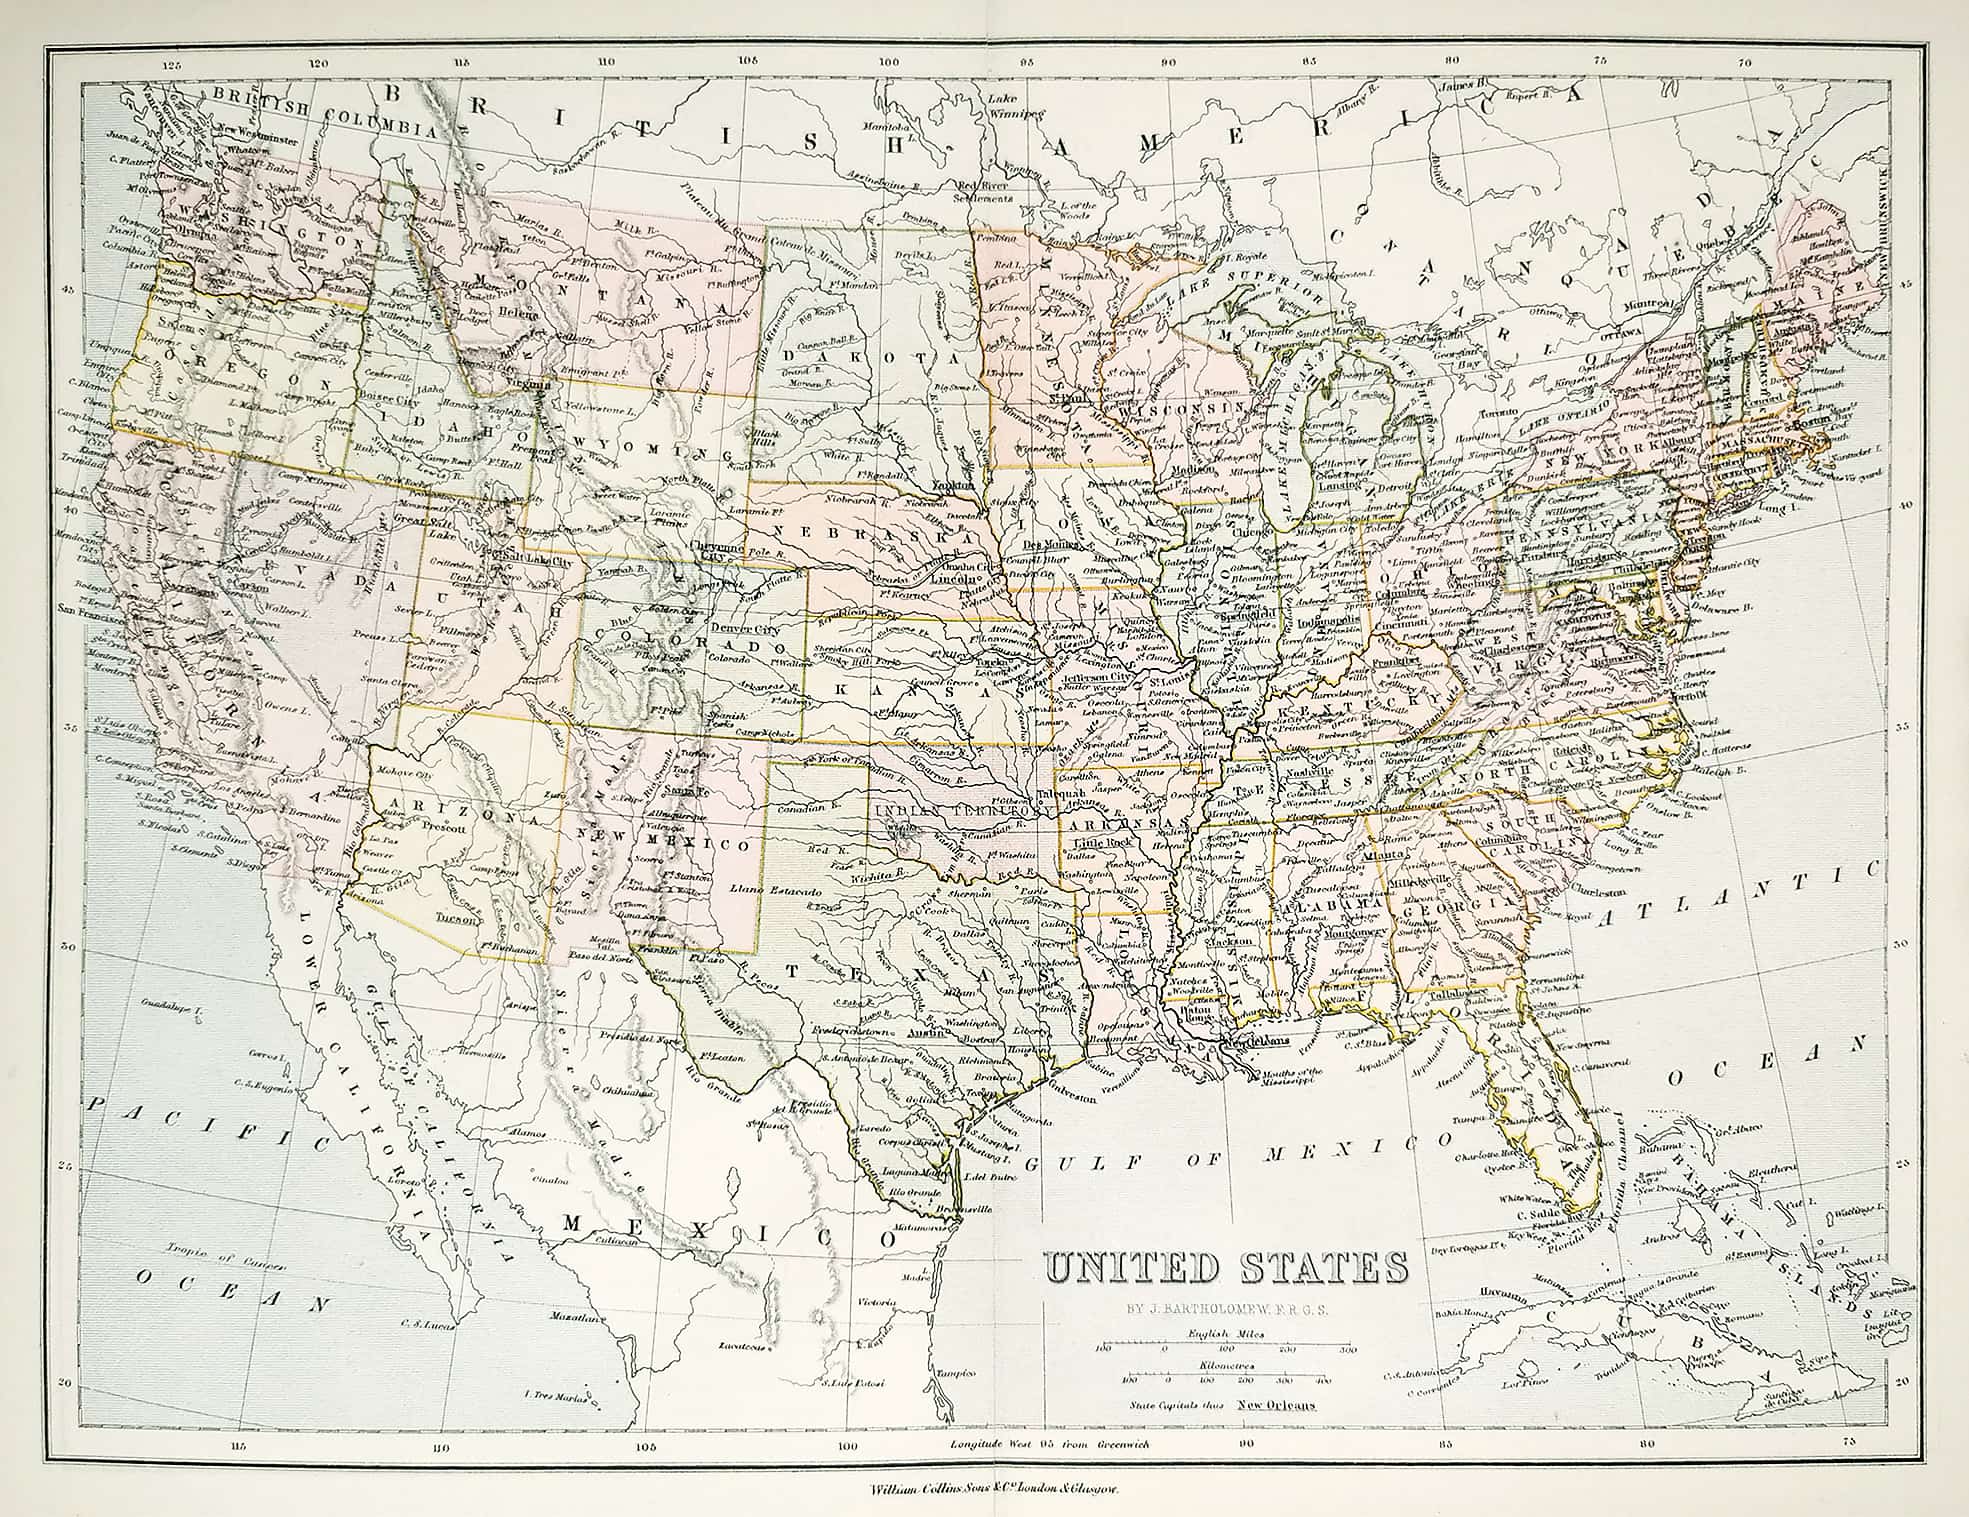 United States - Antique Map from 1890